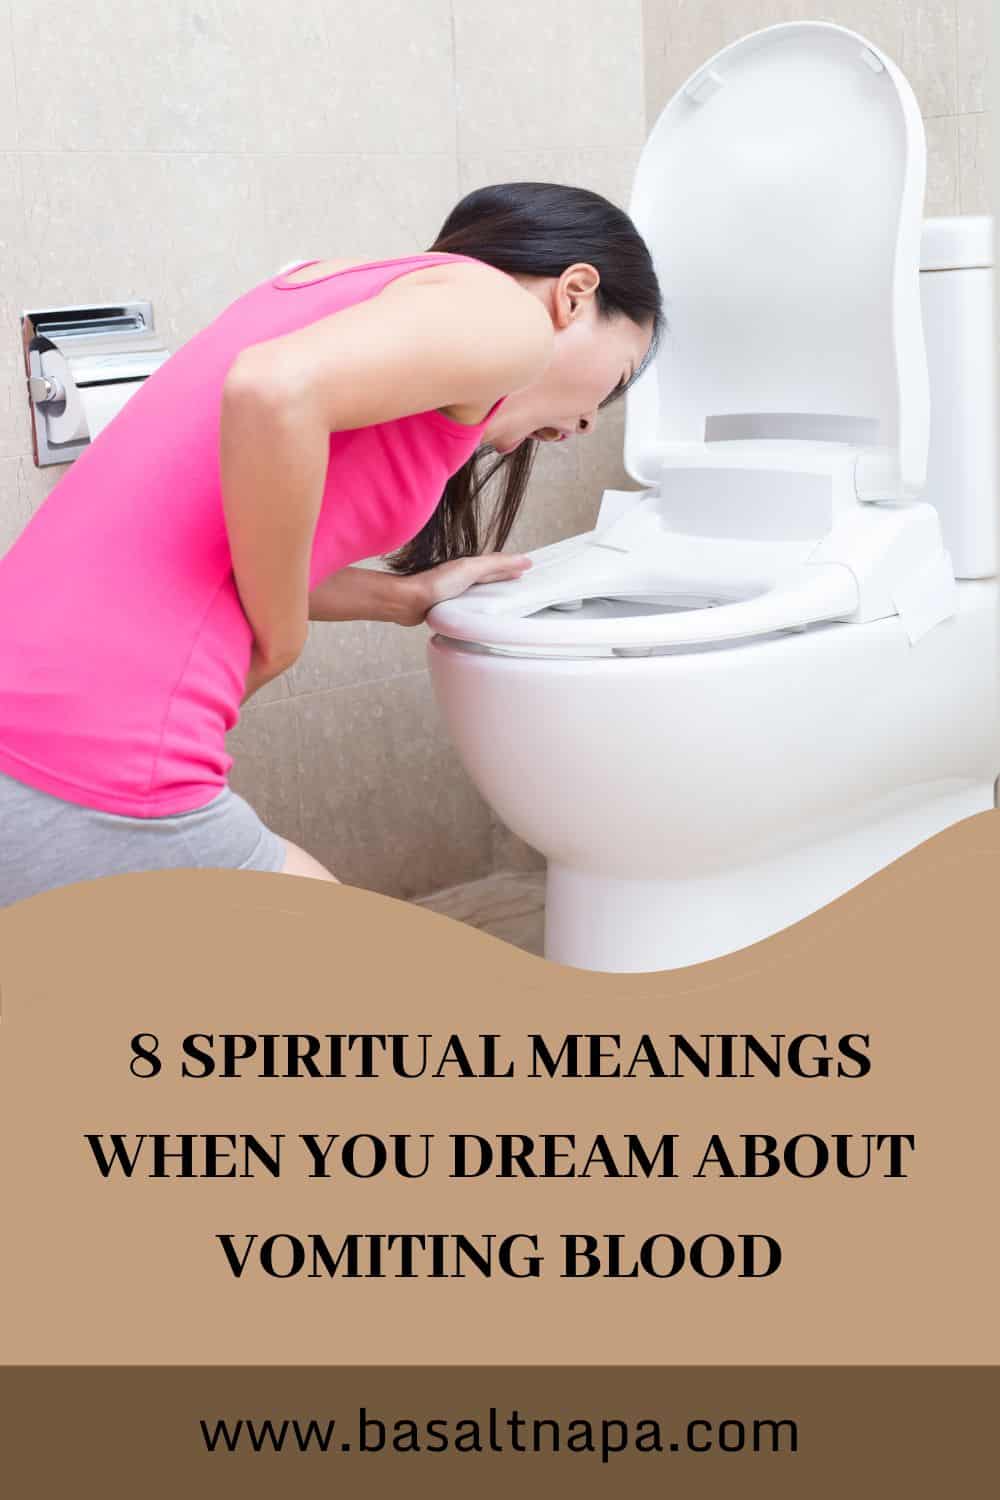 Other Symbols Related To Vomiting Dreams